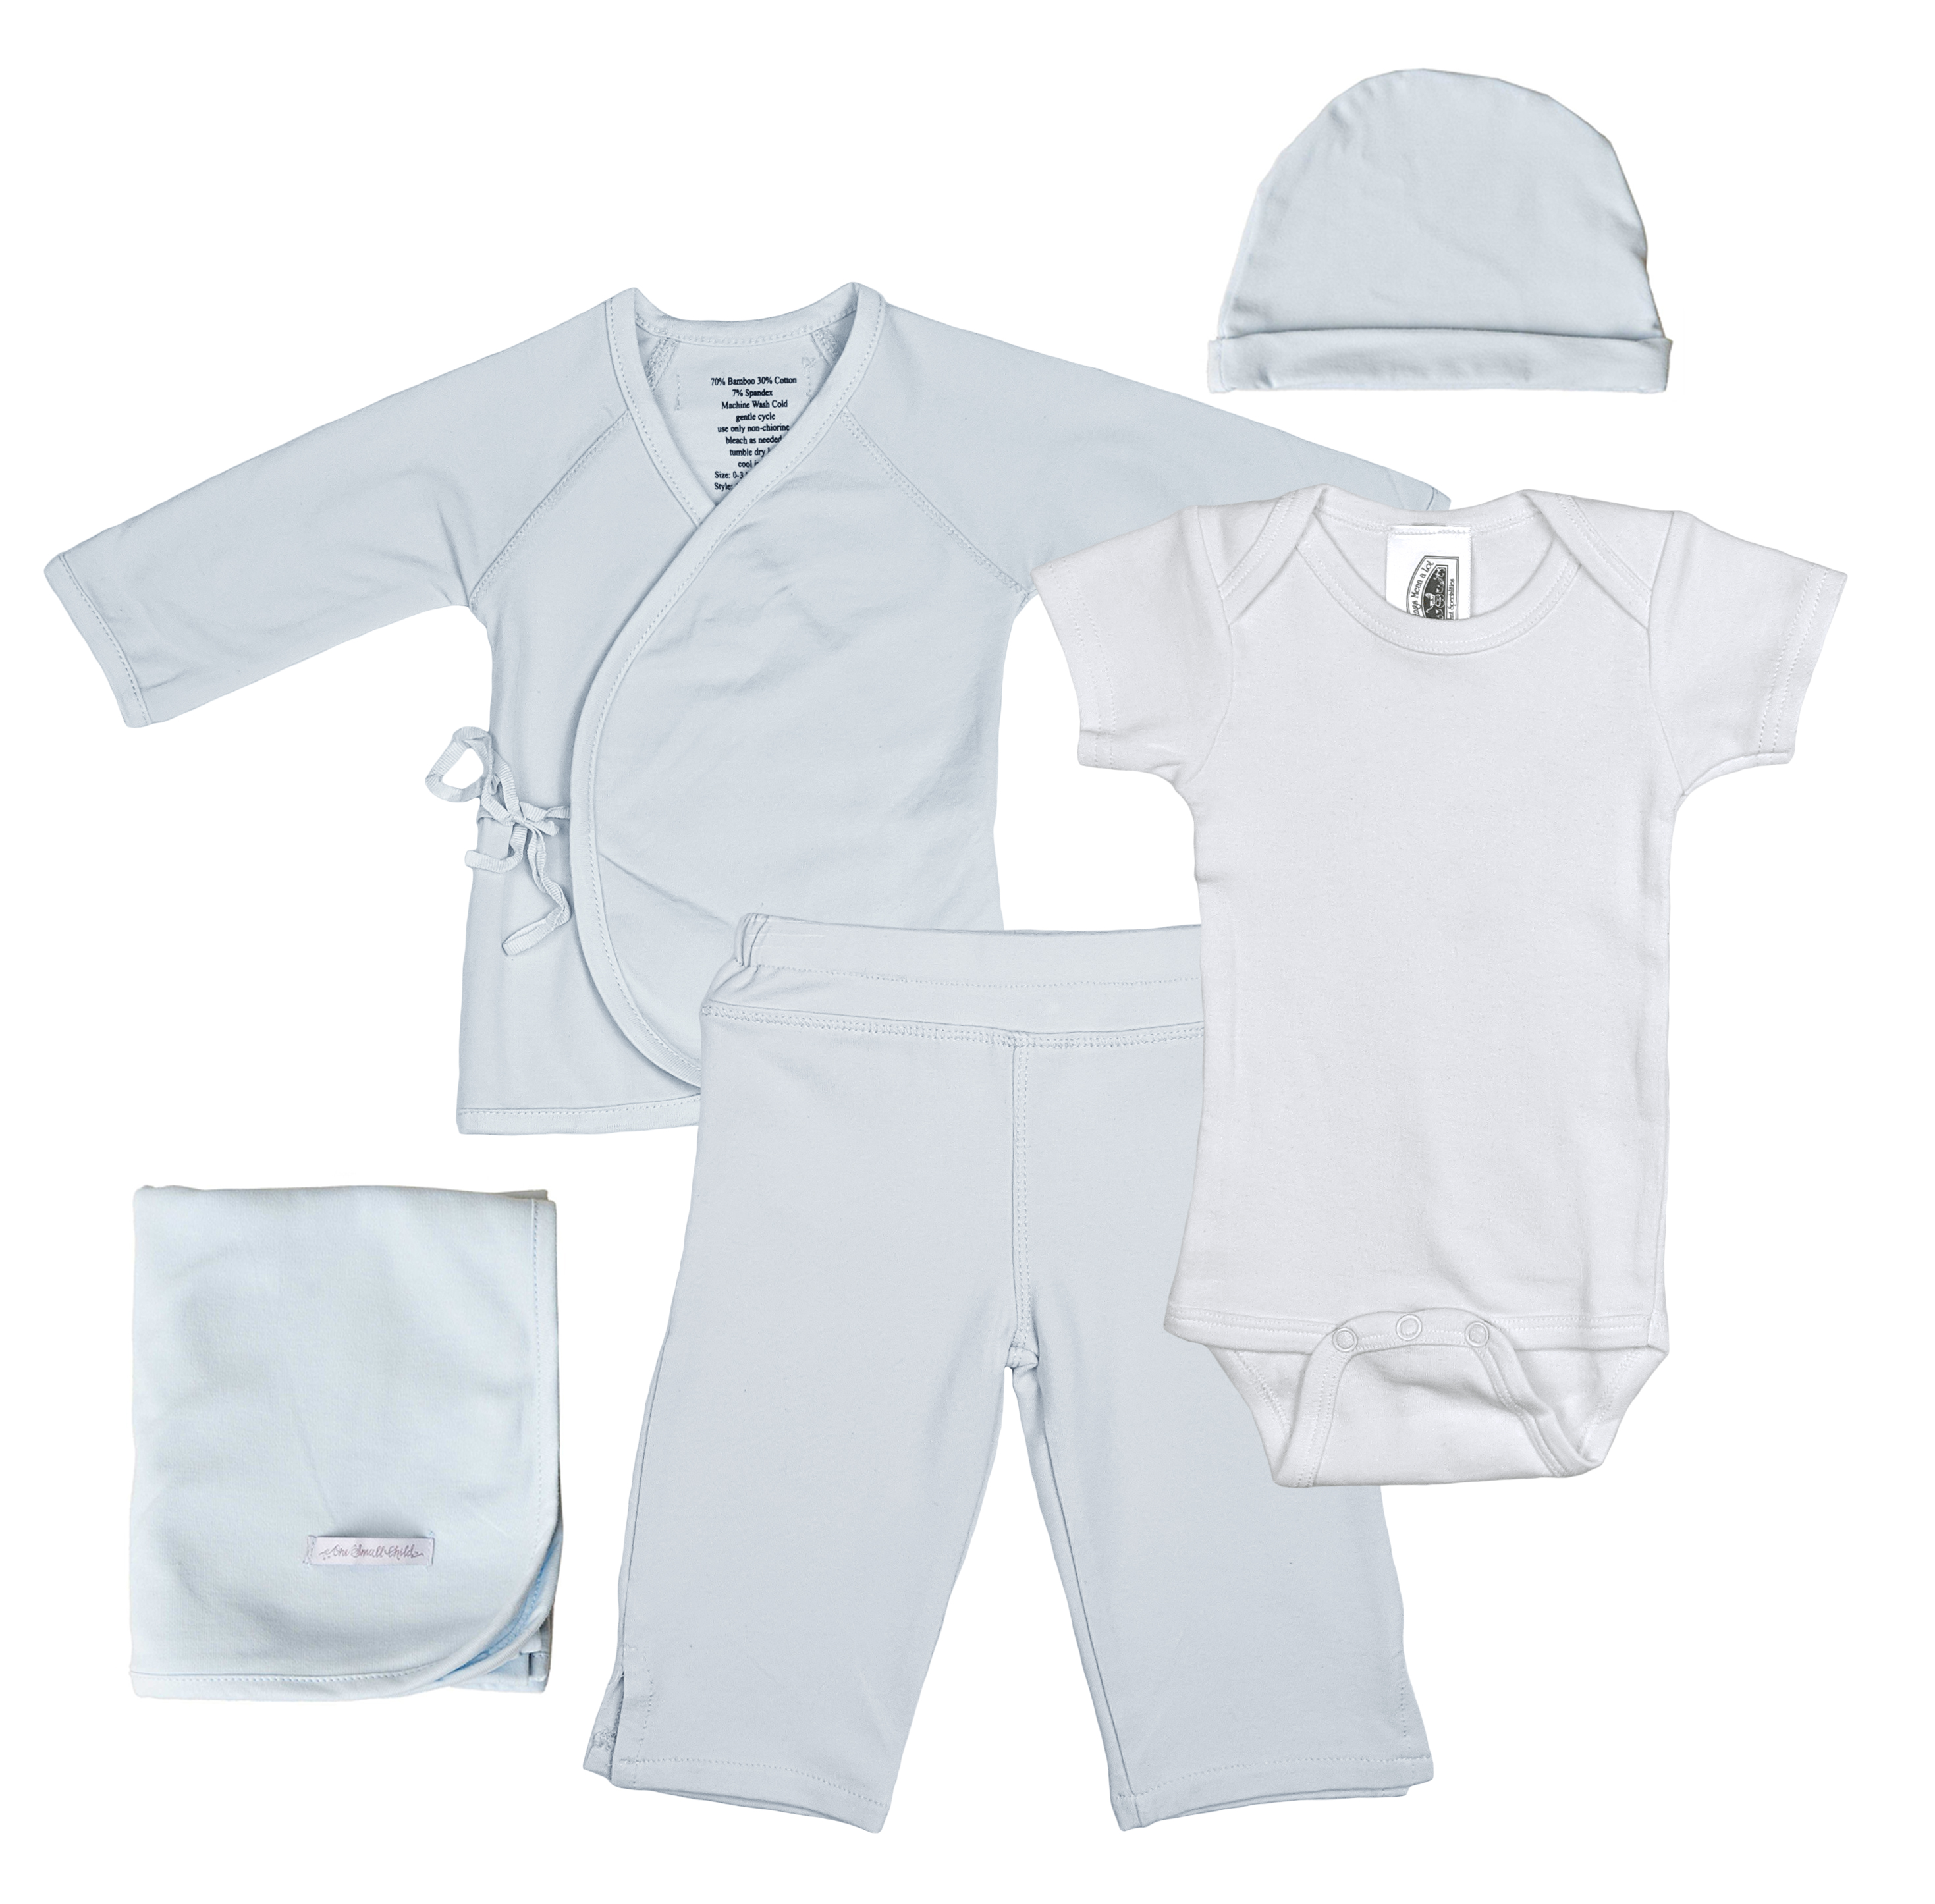 Boys Five-Piece Bamboo Layette Set in Blue or White - Little Things Mean a Lot